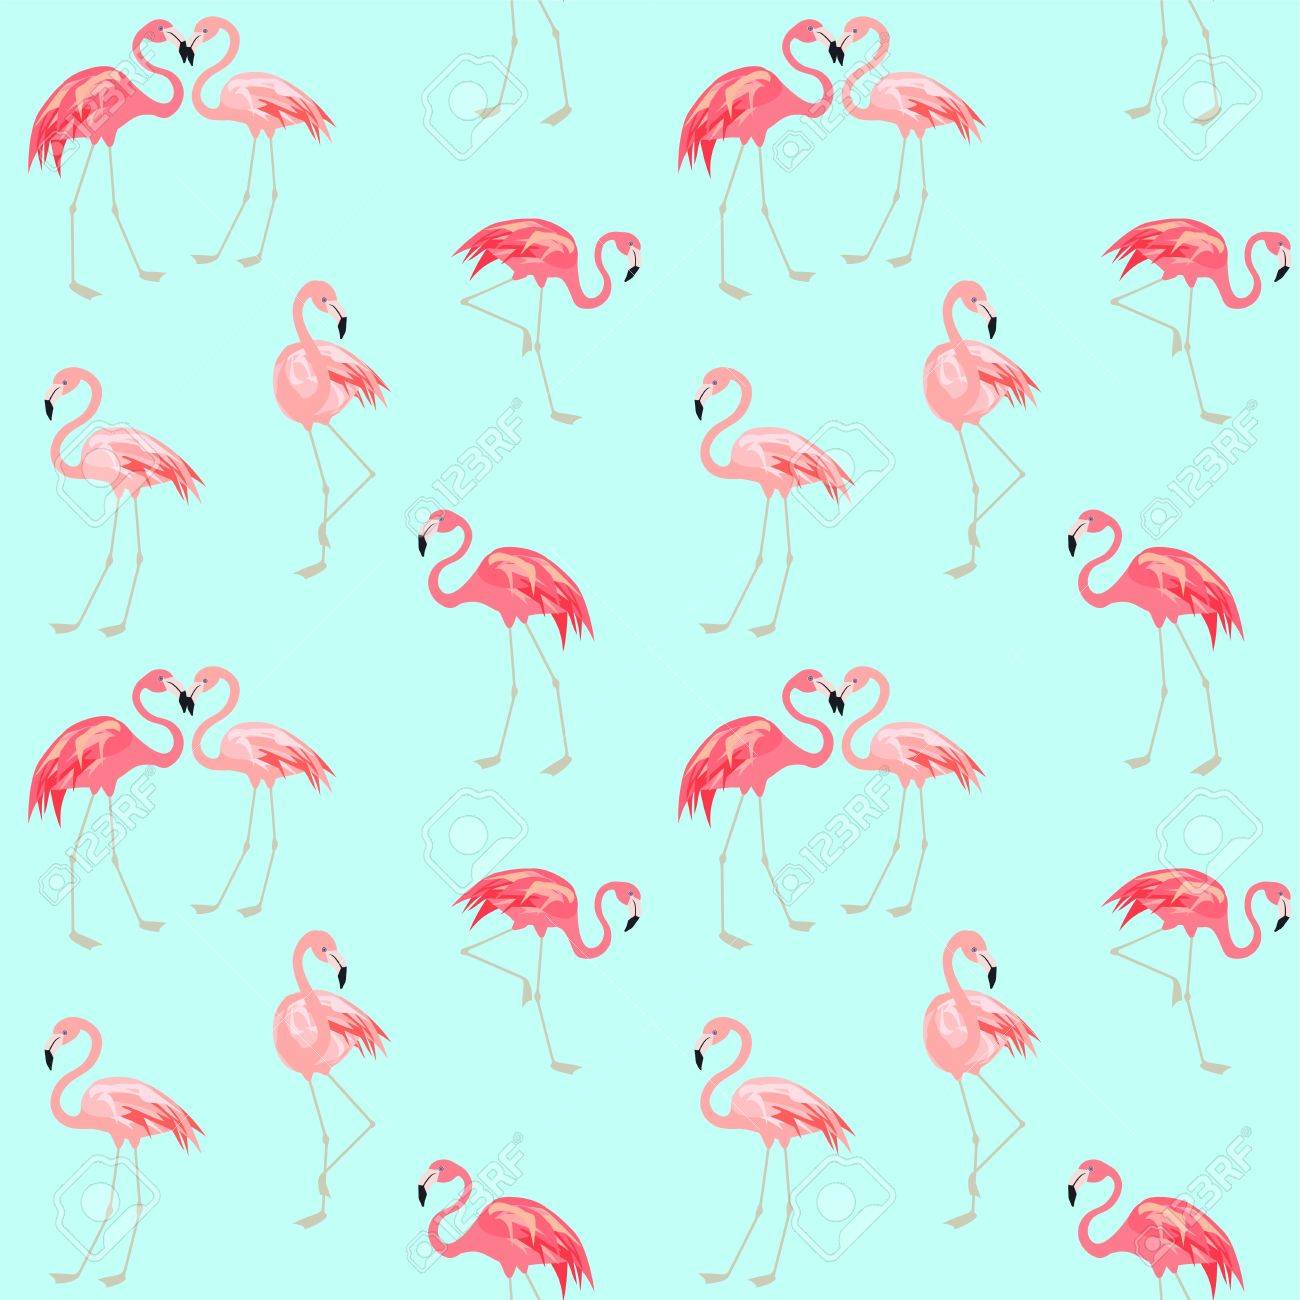 Wallpaper With Cute Pink Flamingo Royalty Cliparts